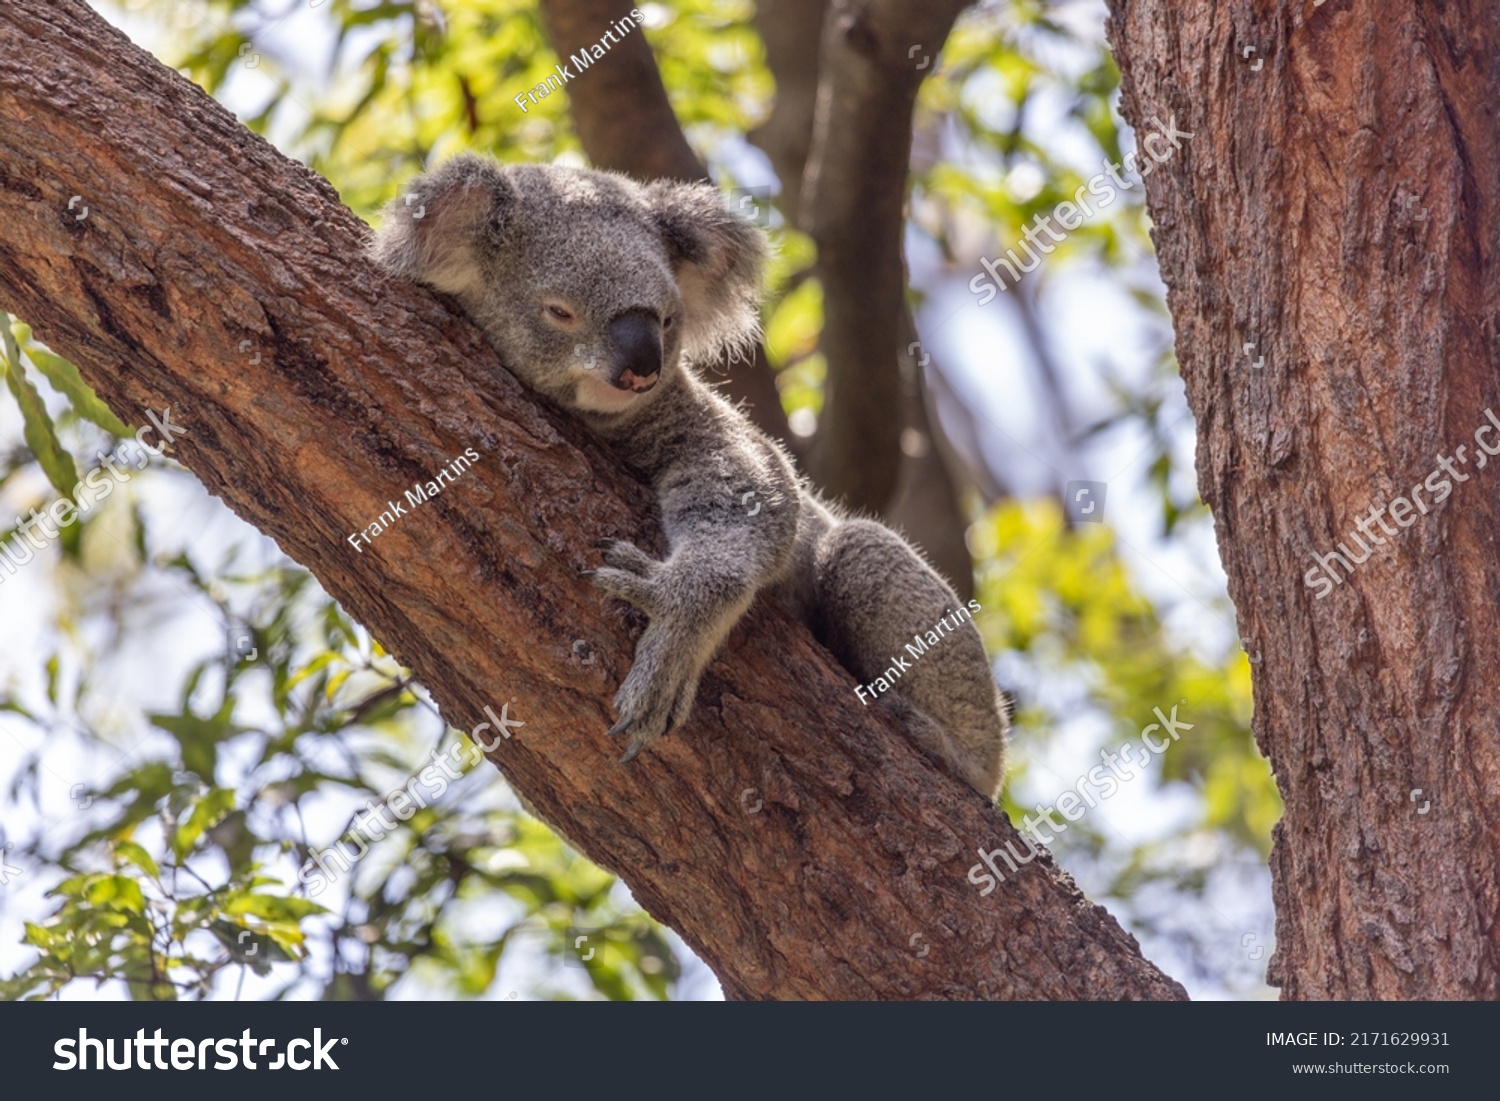 Close-up of a Koala (Phascolarctos cinereus) fast asleep while holding on to a tree branch, with green foliage in the background. Koalas are native Australian marsupials. #2171629931